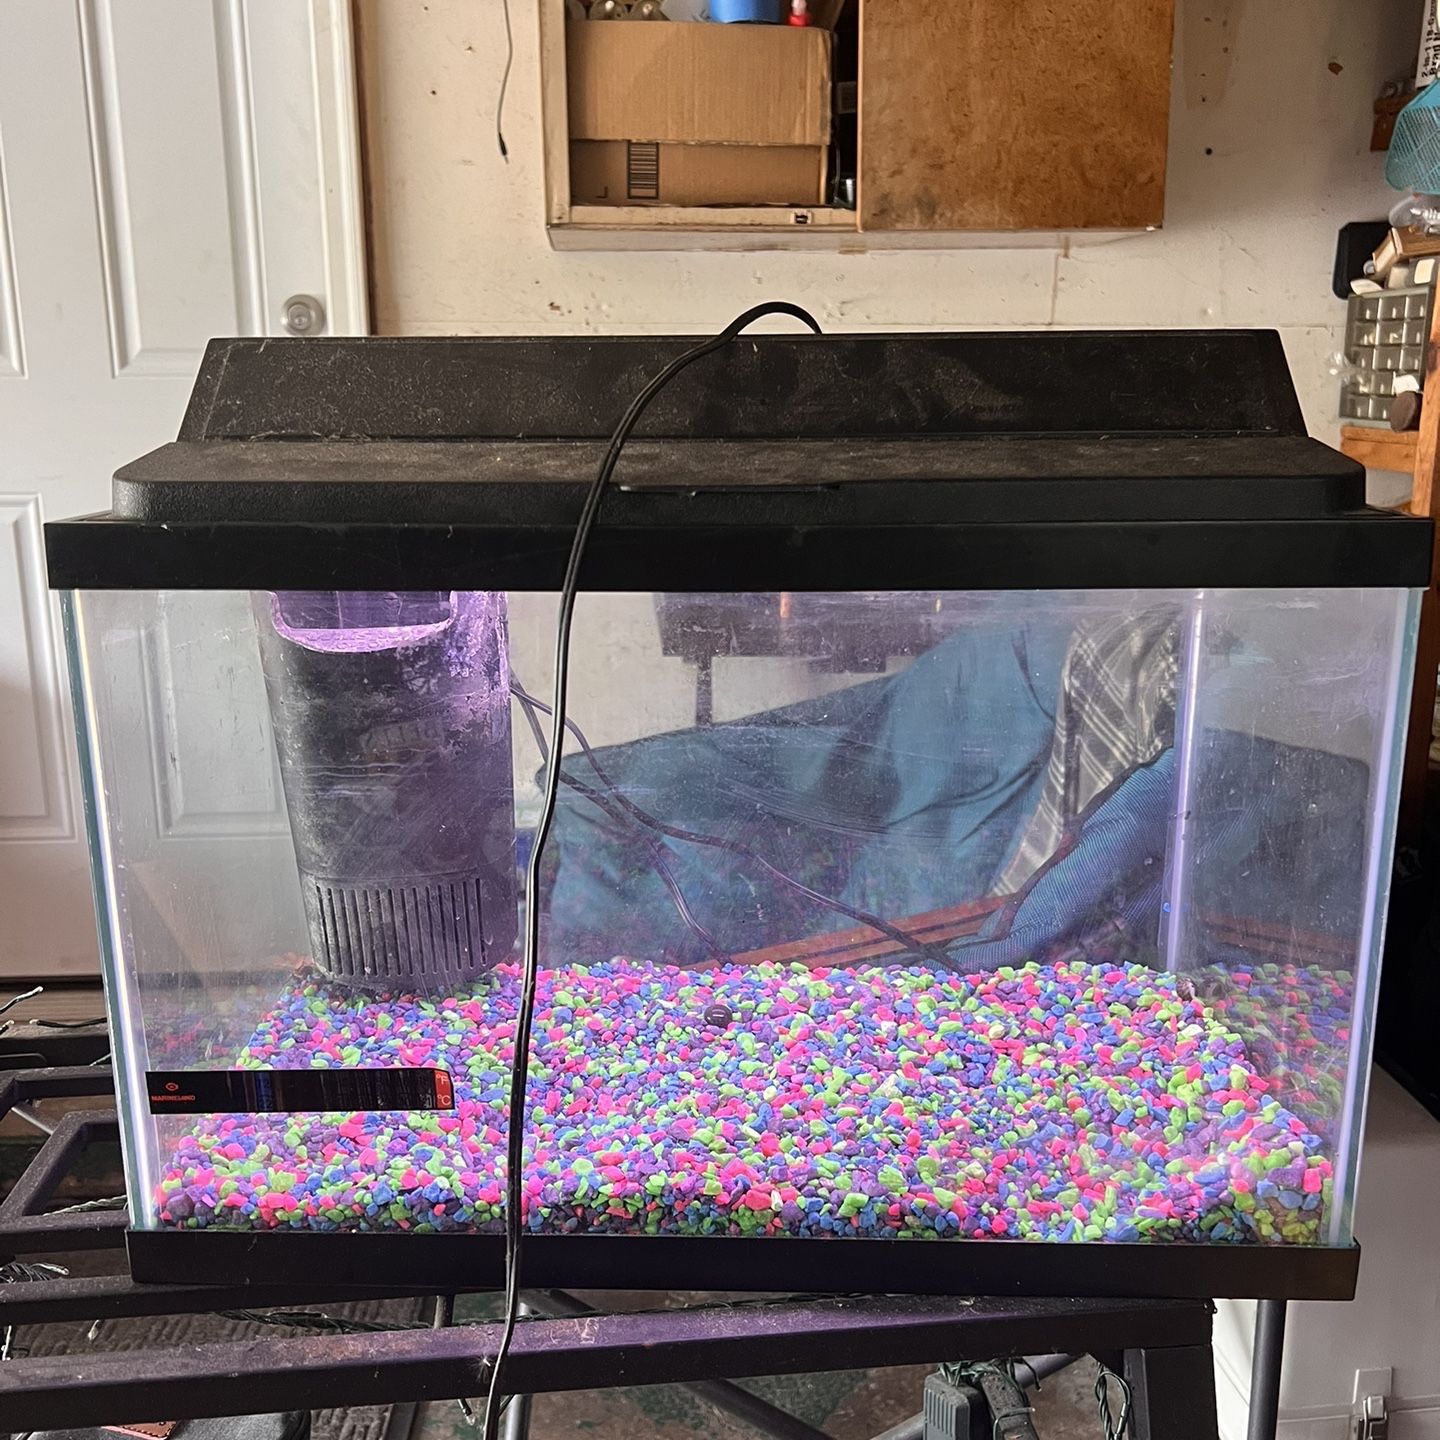 Fish tank 10 gallons with filter, light, decor and everything else you’d need for a fish